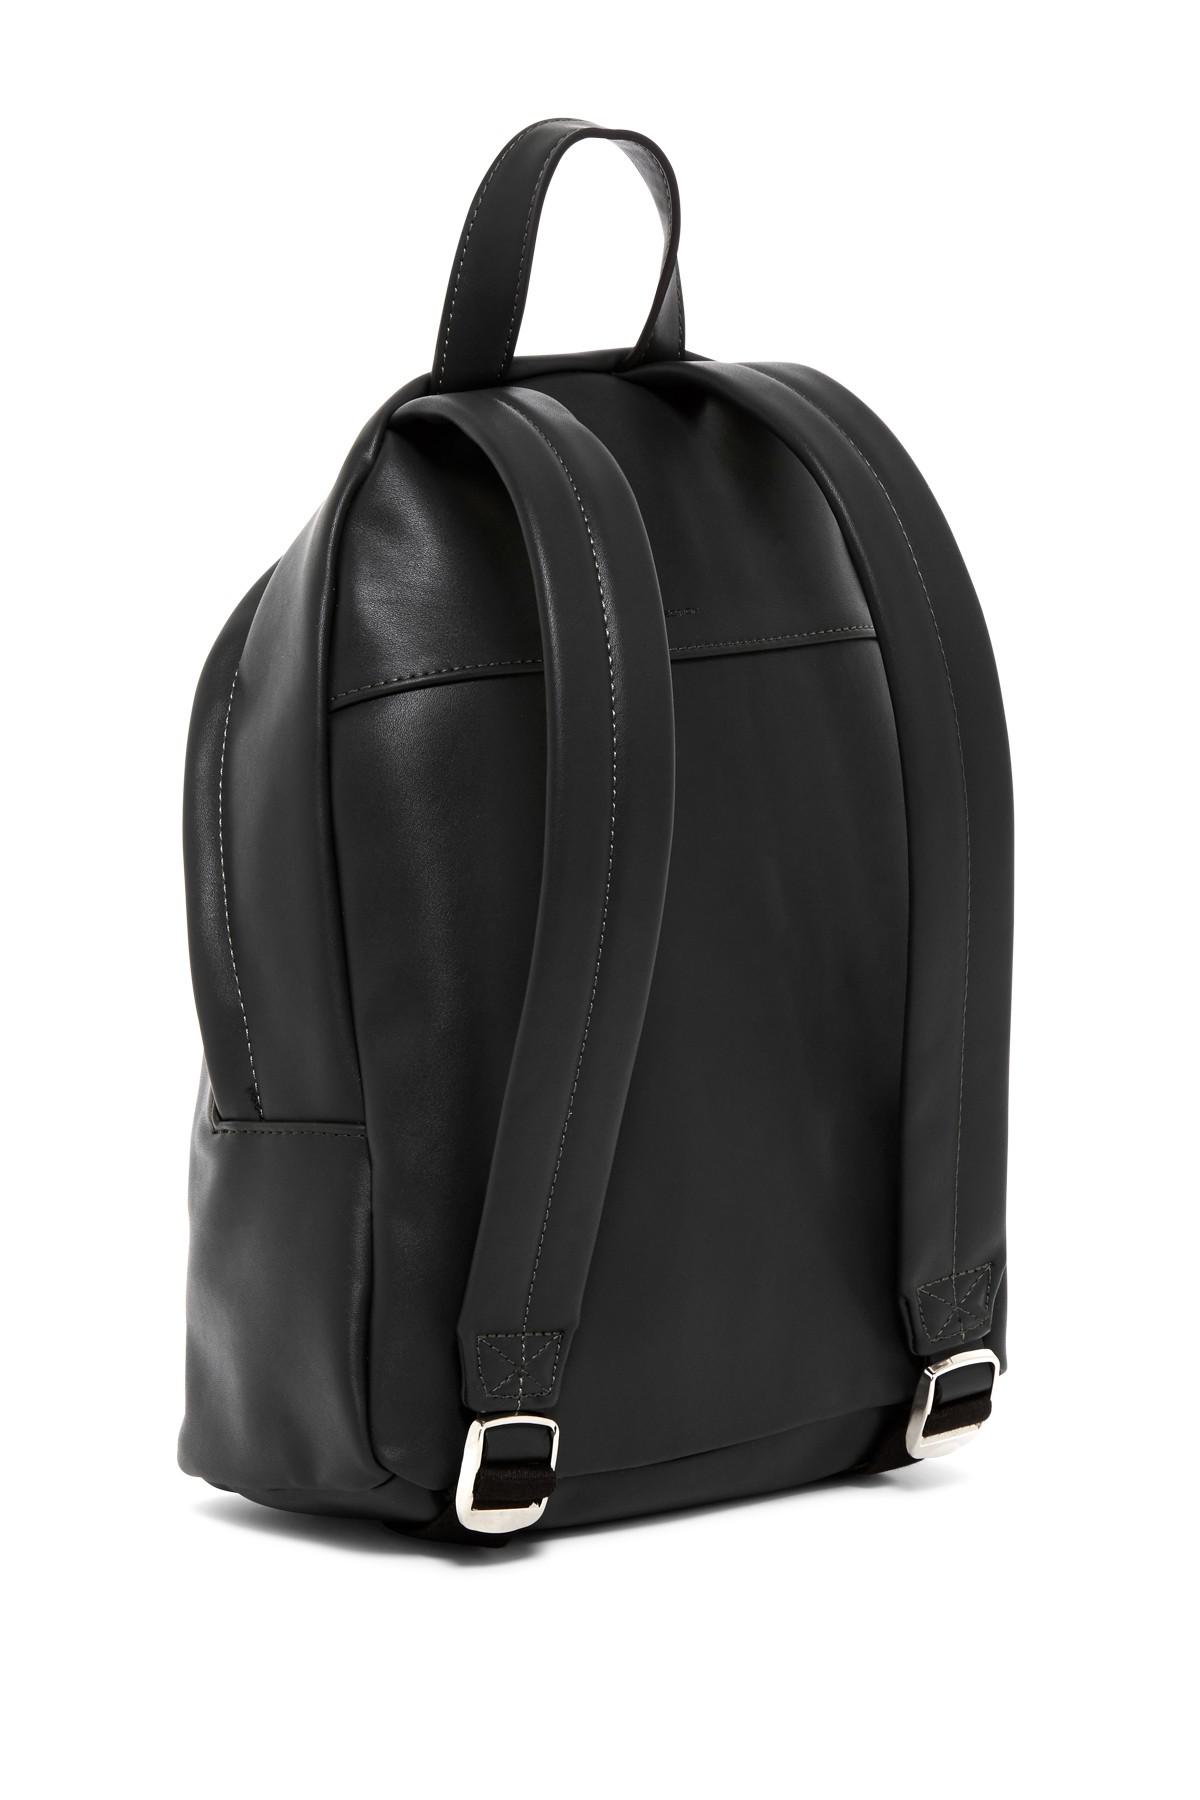 French Connection Silk Jace Backpack in Black - Lyst